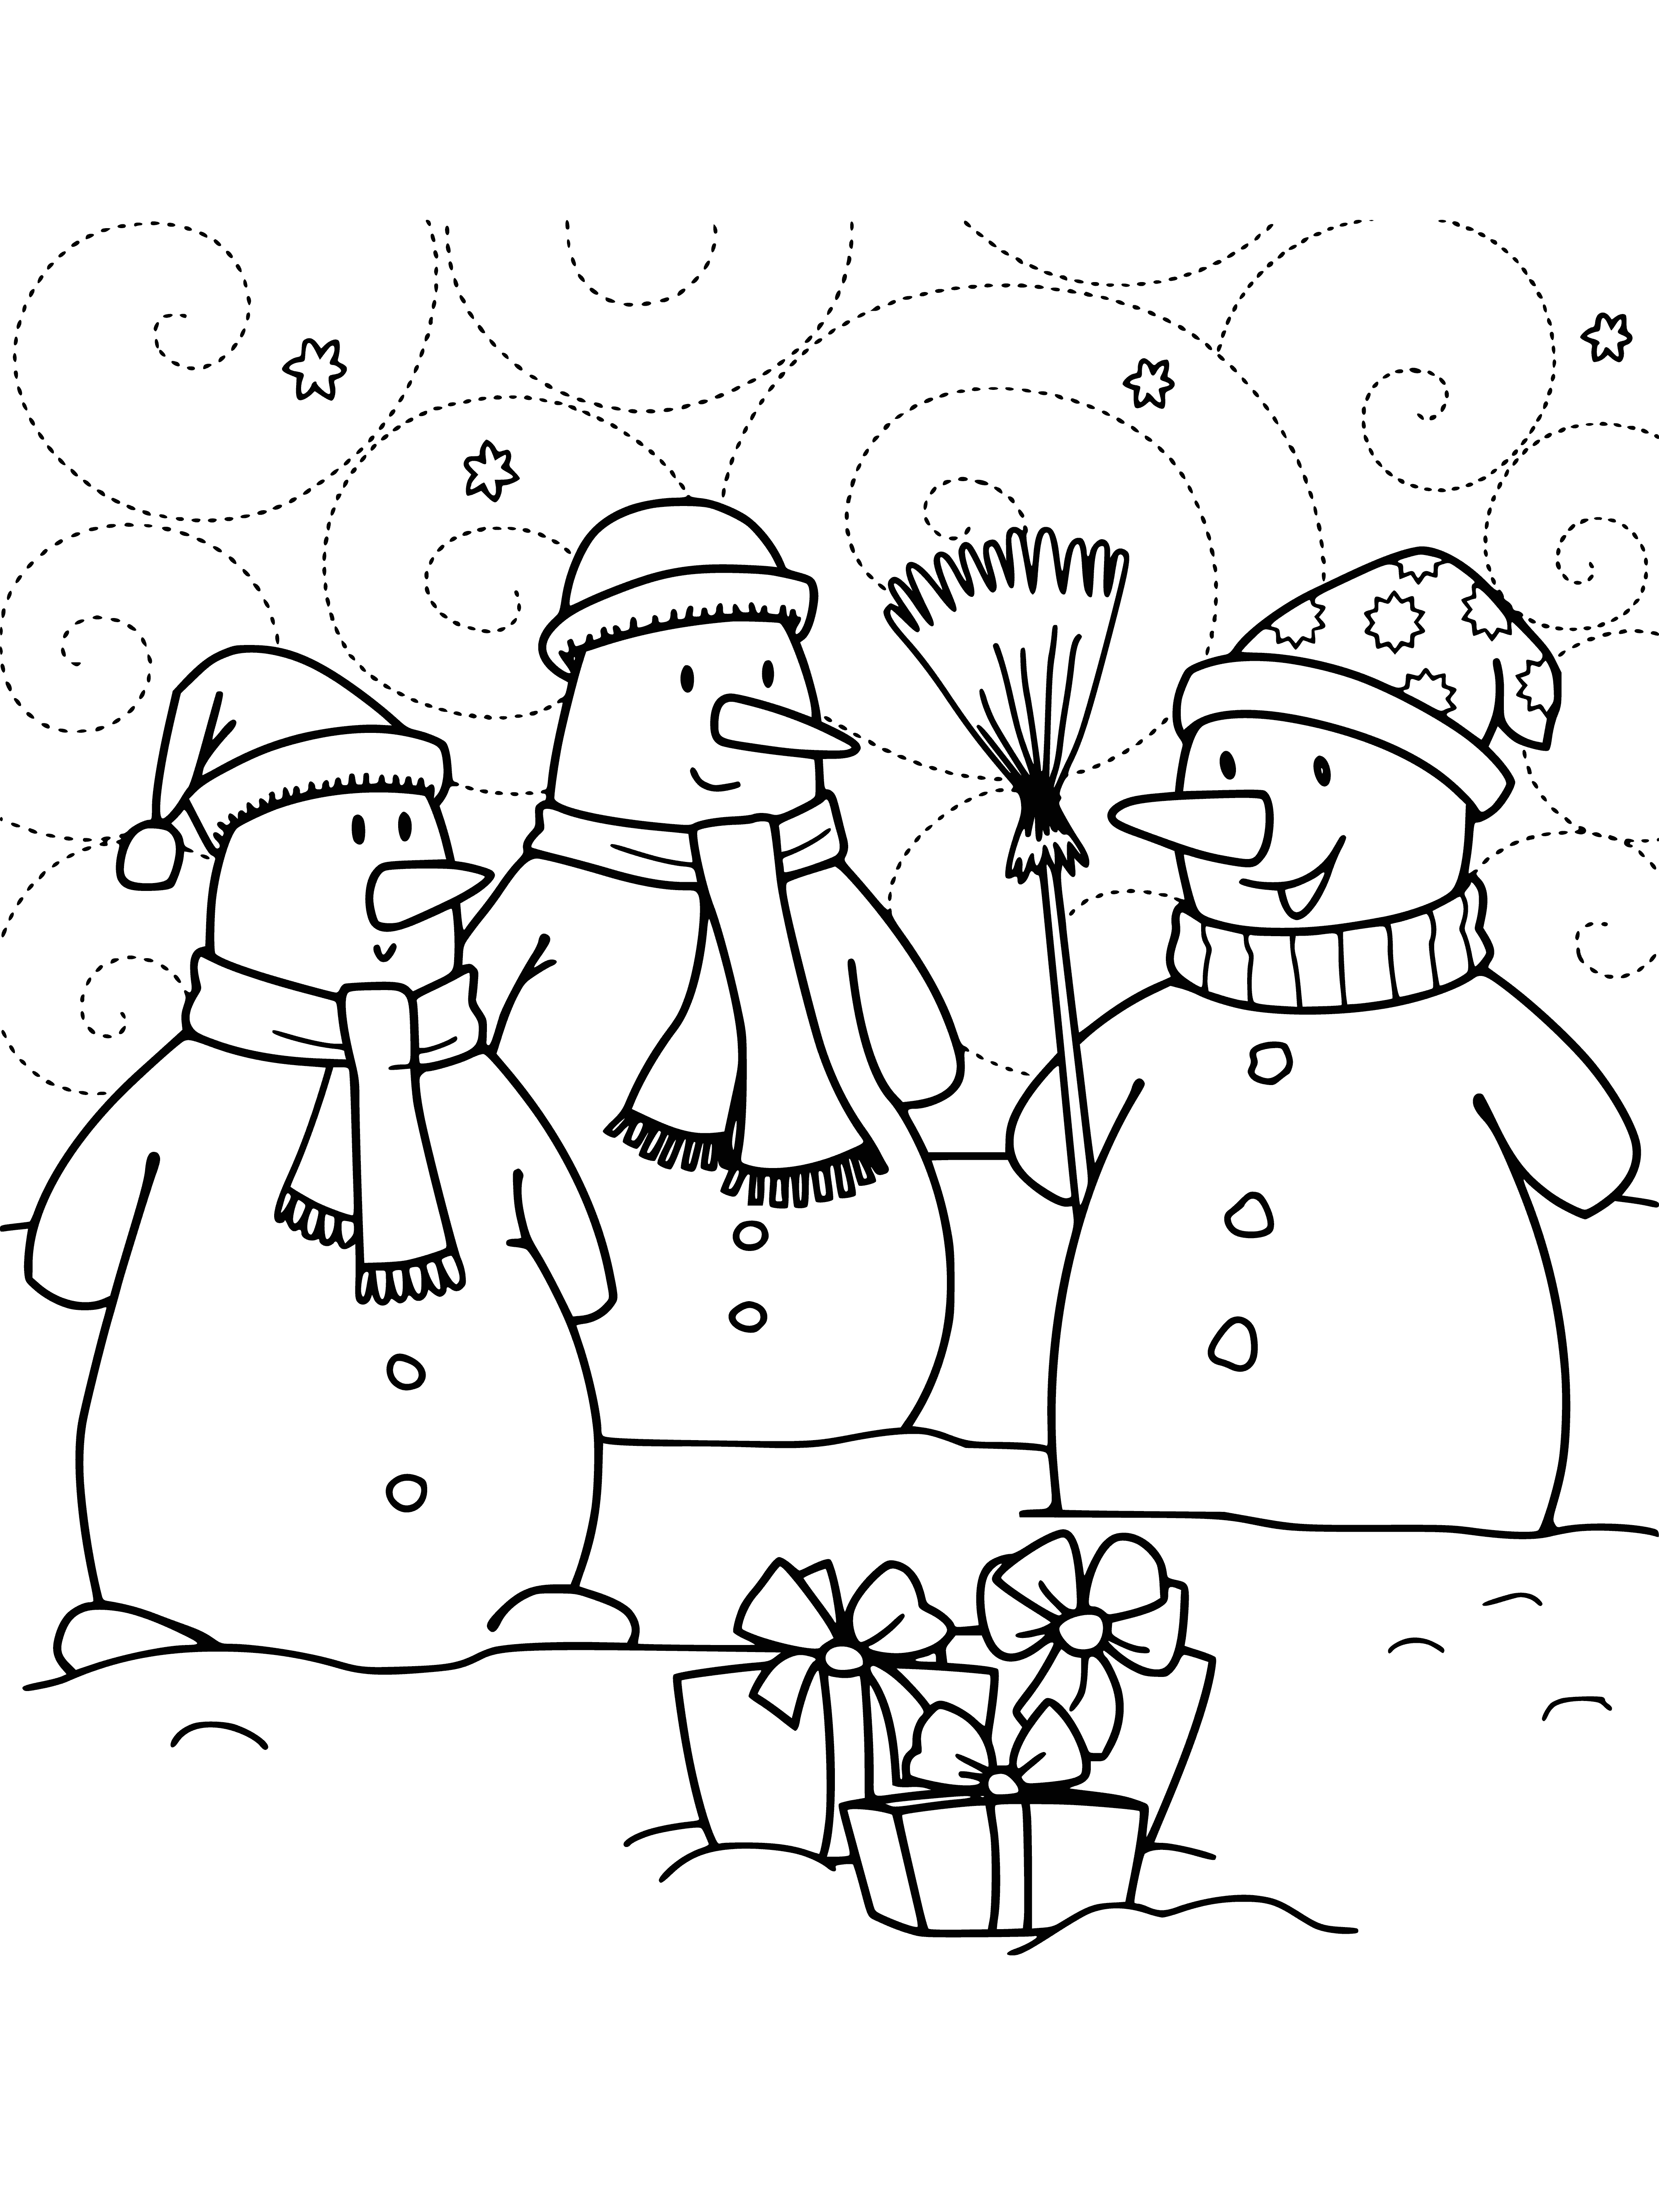 Three snowmen, tallest w/ carrot nose, shorter two w/ coal eyes & mouth, all wearing hats & holding sticks. Standing on a layer of snow.